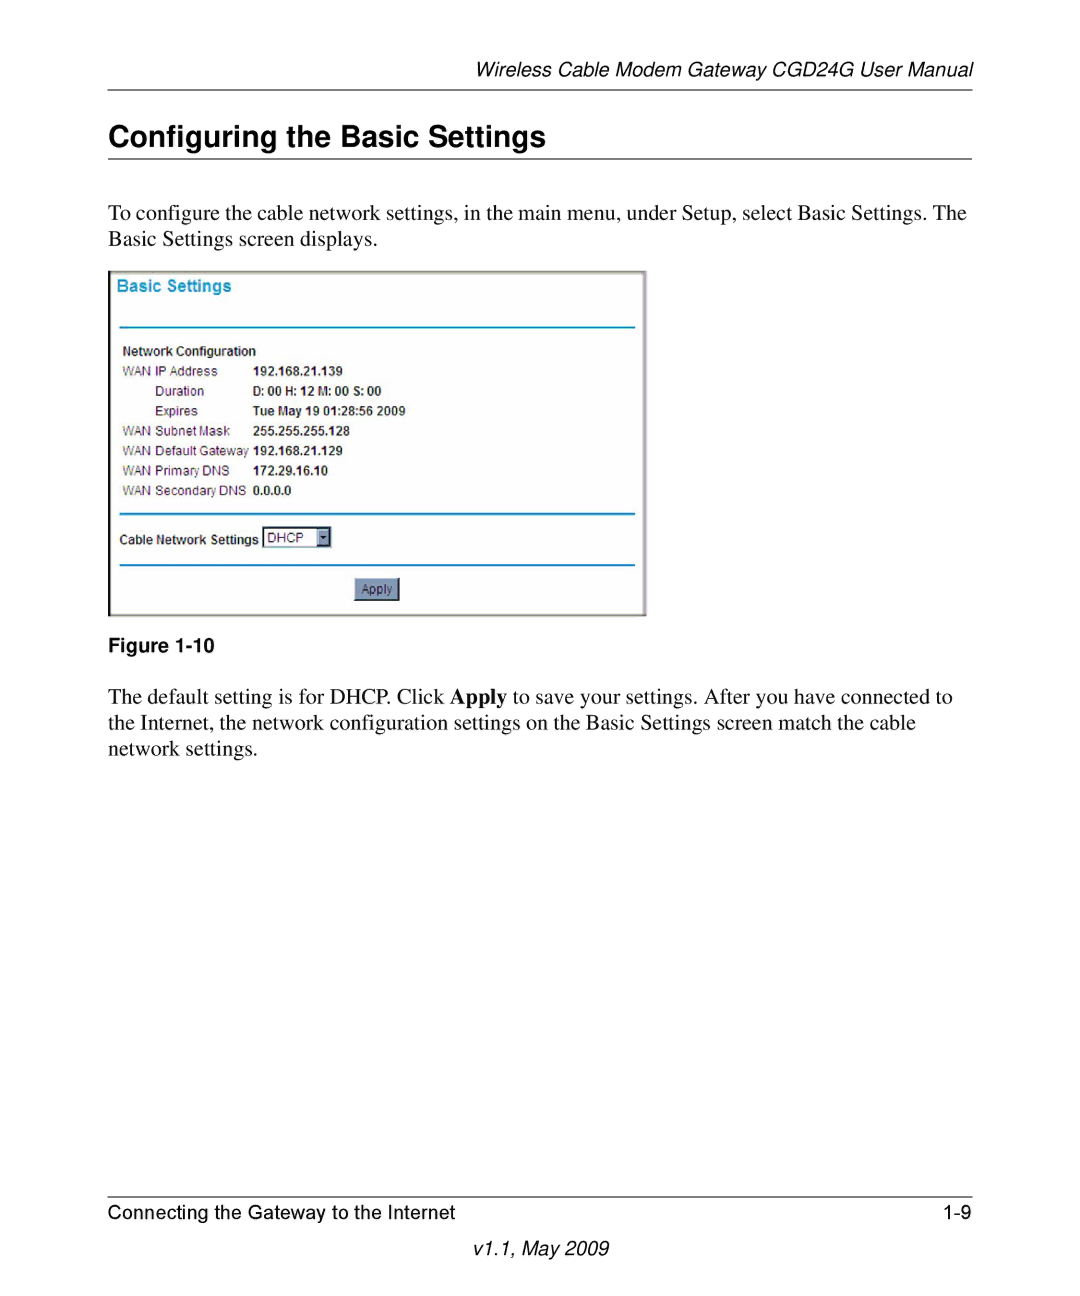 Gateway CGD24G user manual Configuring the Basic Settings 